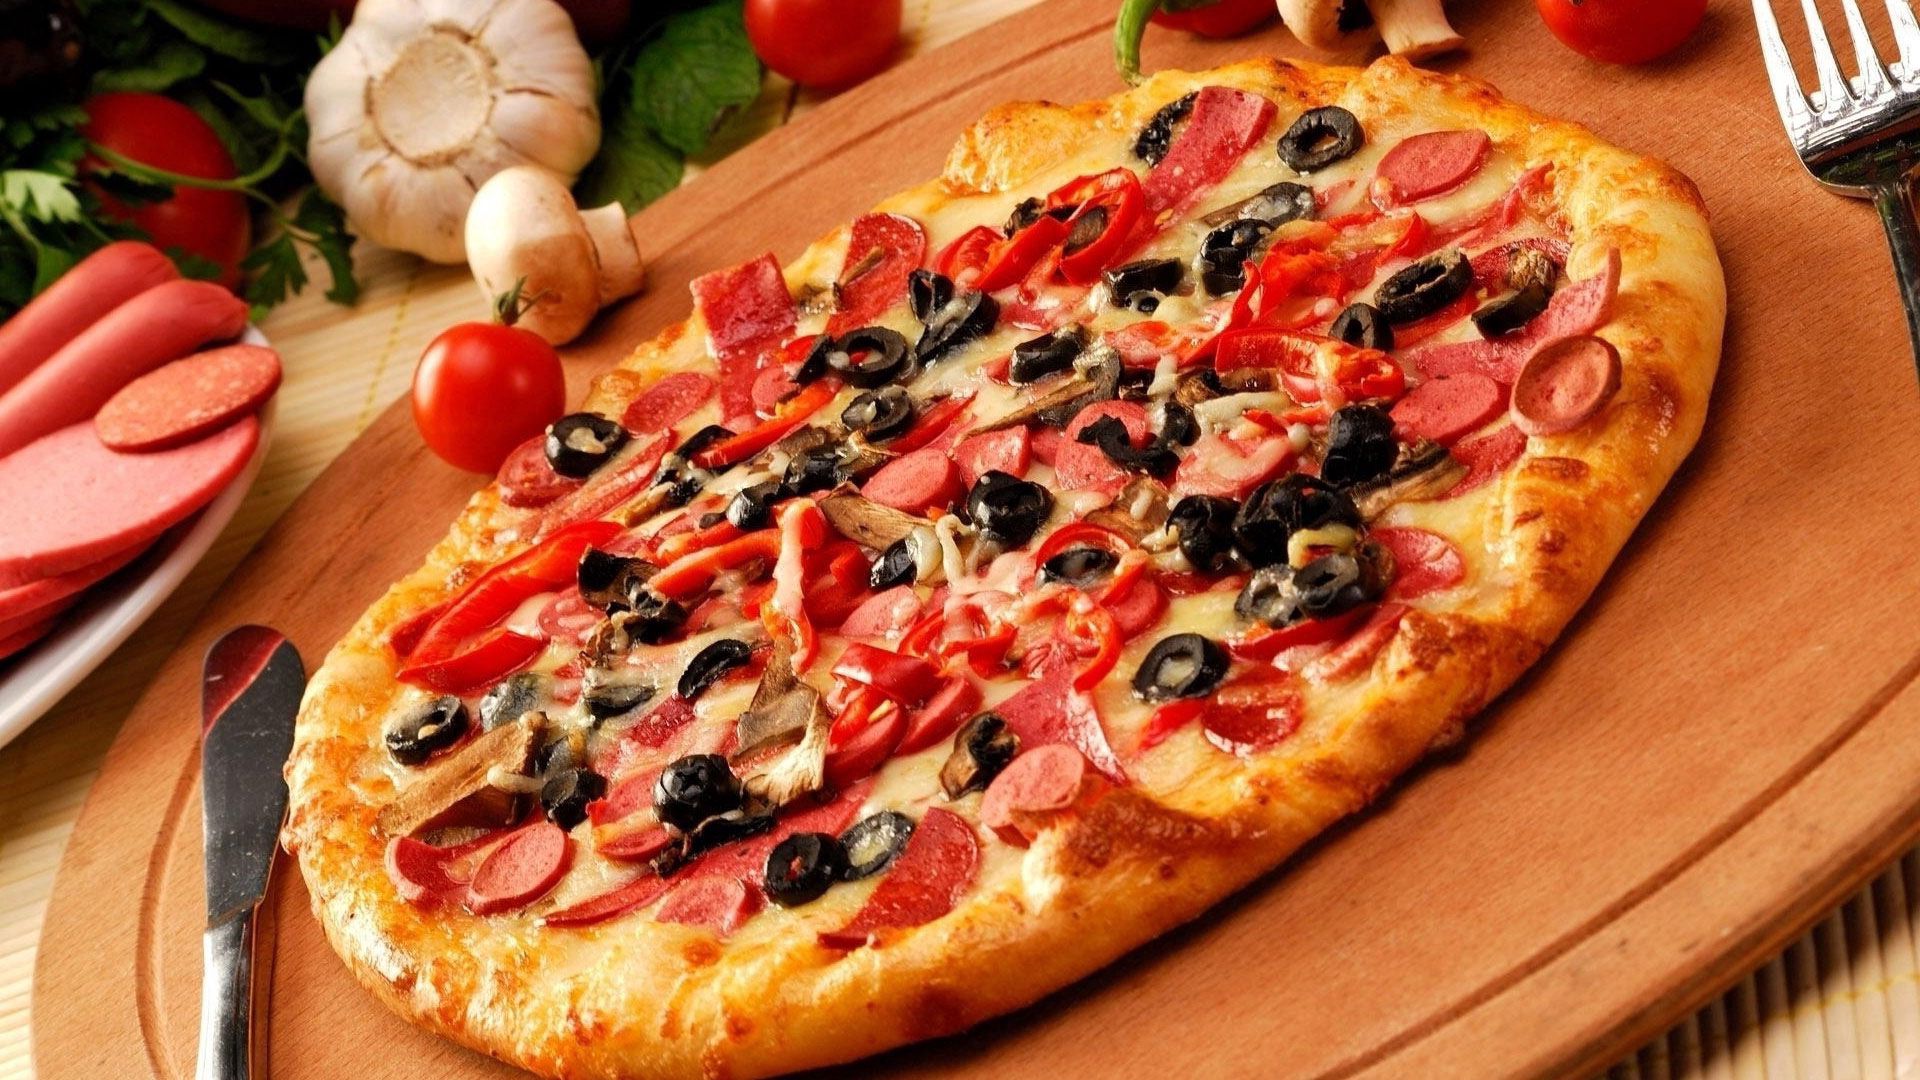 pizza, bakery products, food, baking, fork, knife High Definition image